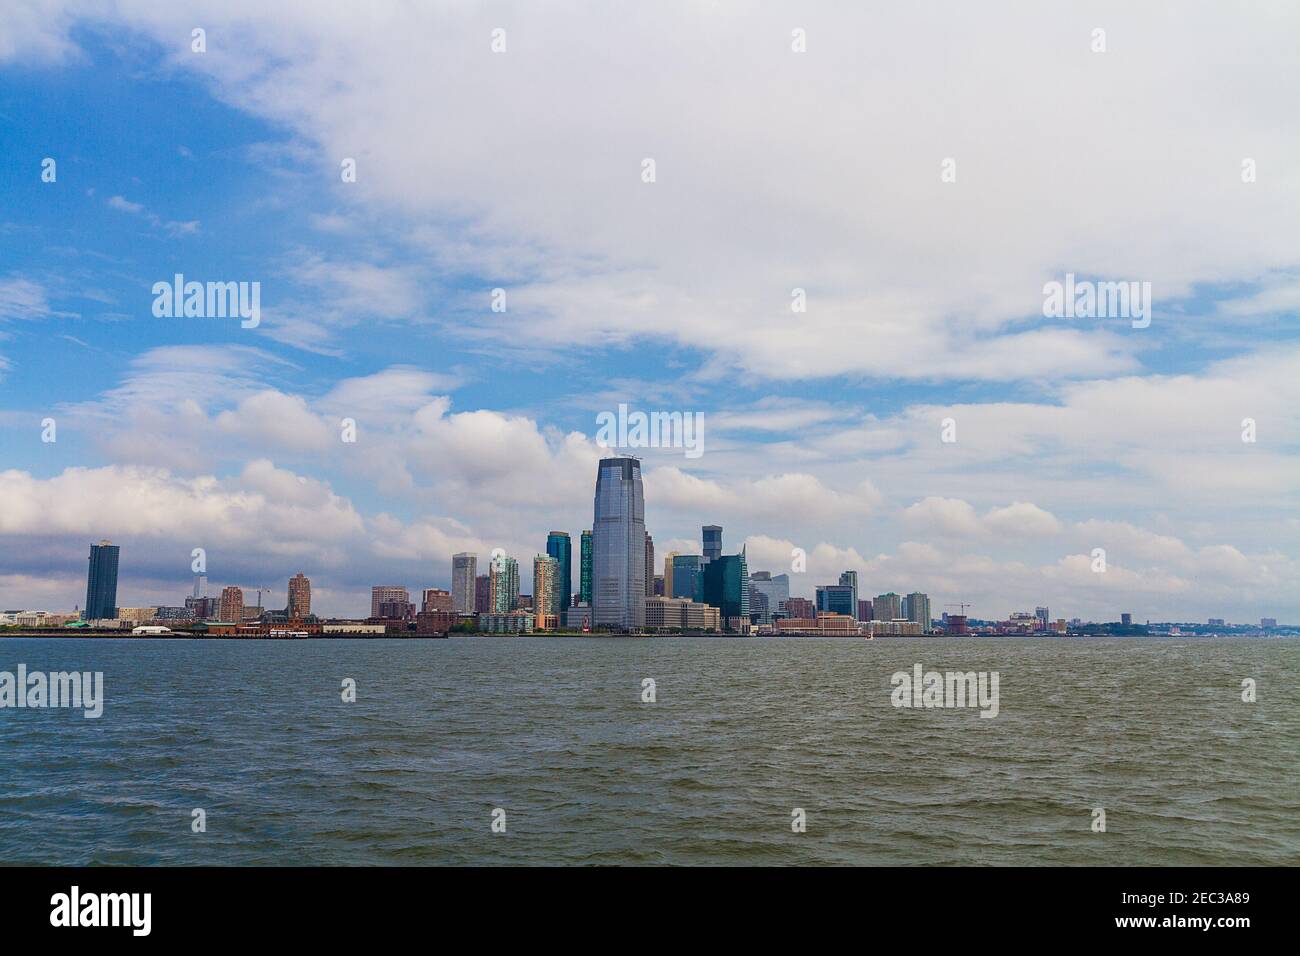 The view of the New York cityscape taken from the ferry on a cloudy day Stock Photo